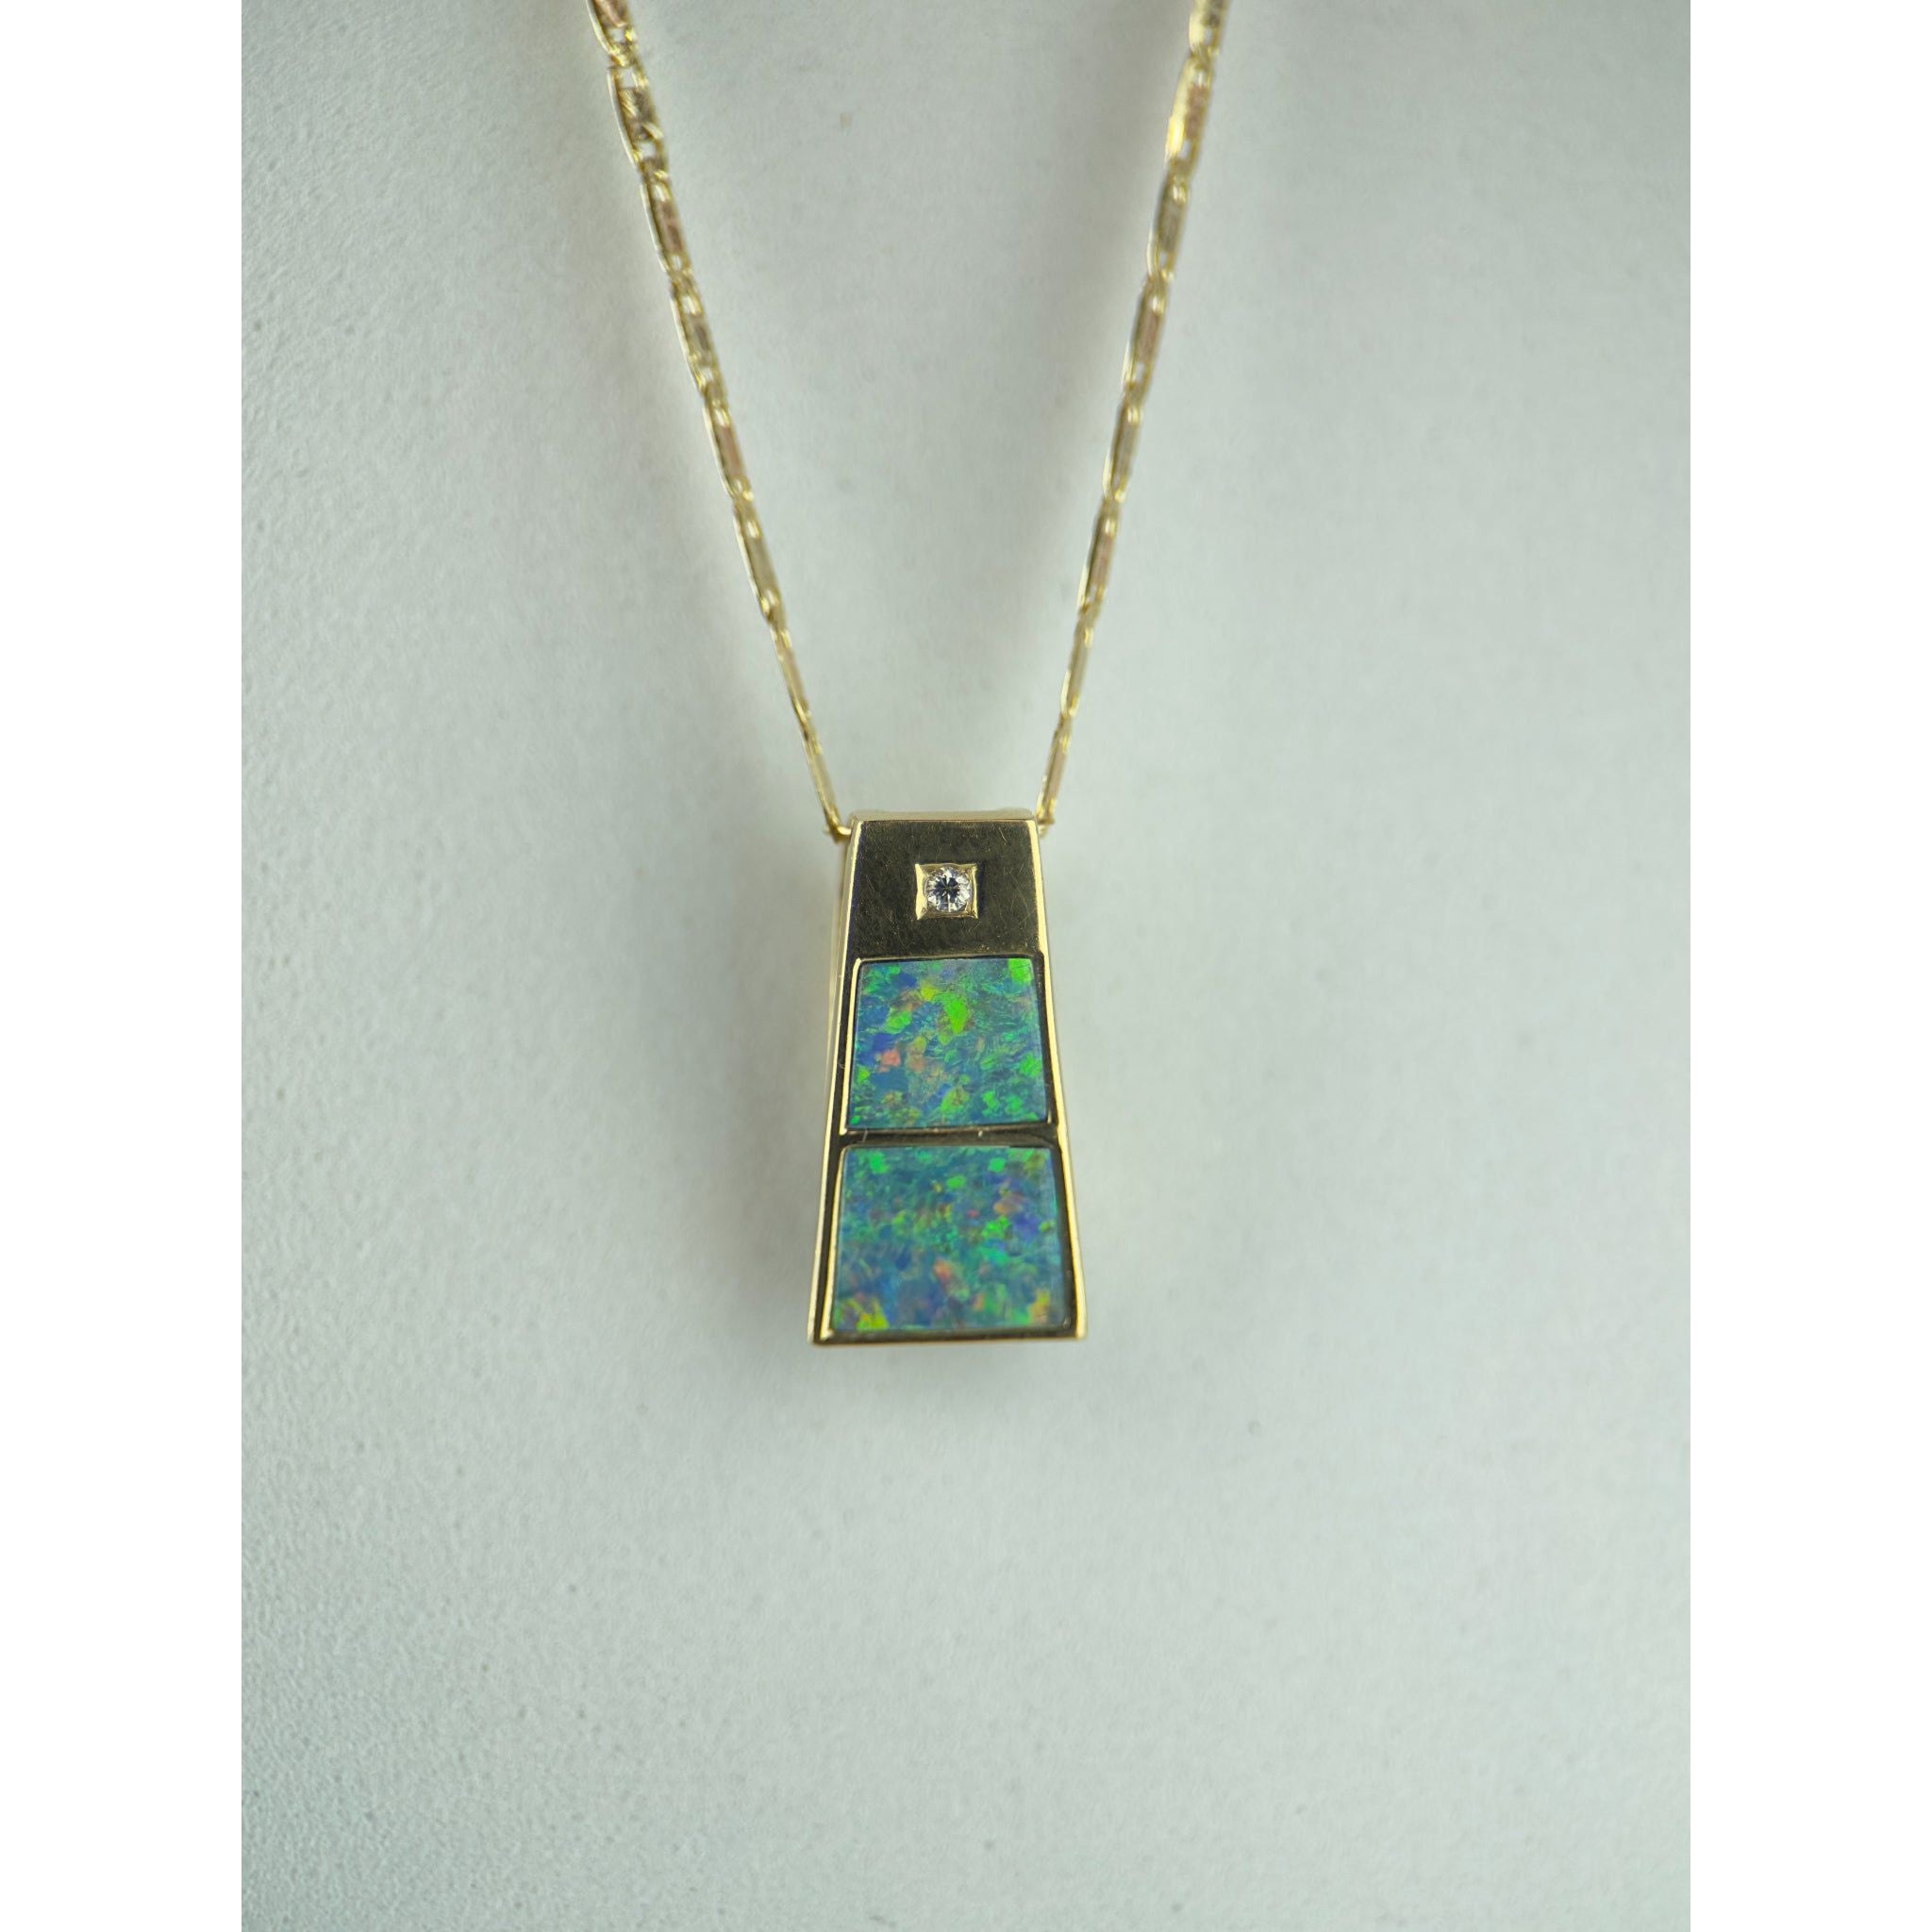 DR1580 - 14K Yellow Gold - Blue Opal - Pendant and Chain